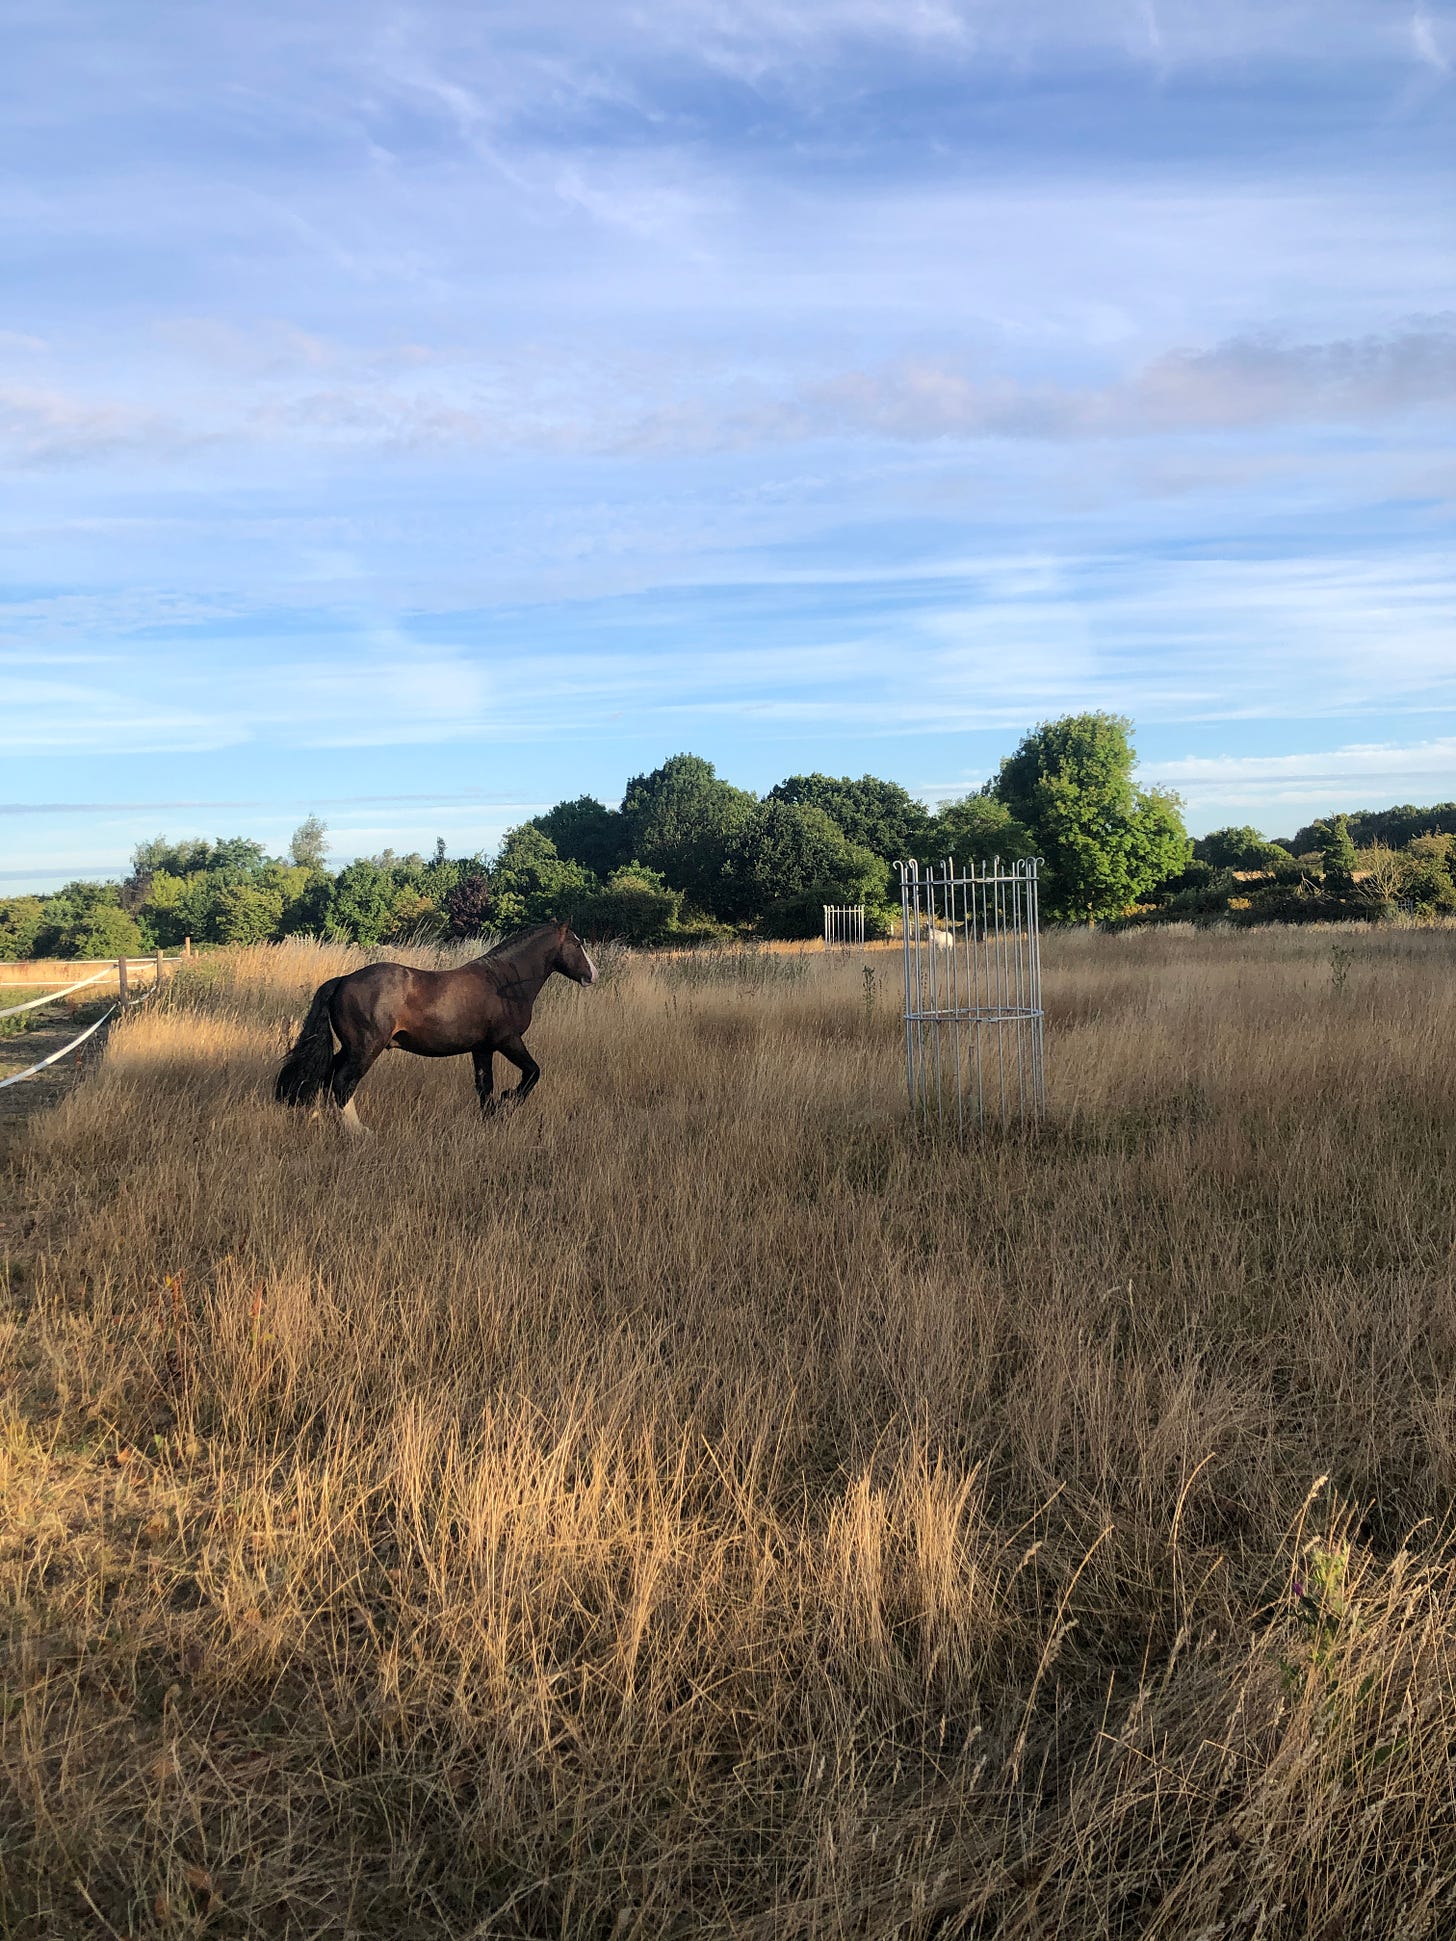 A runaway pony. Captured by Arthur Meek (in photo form)